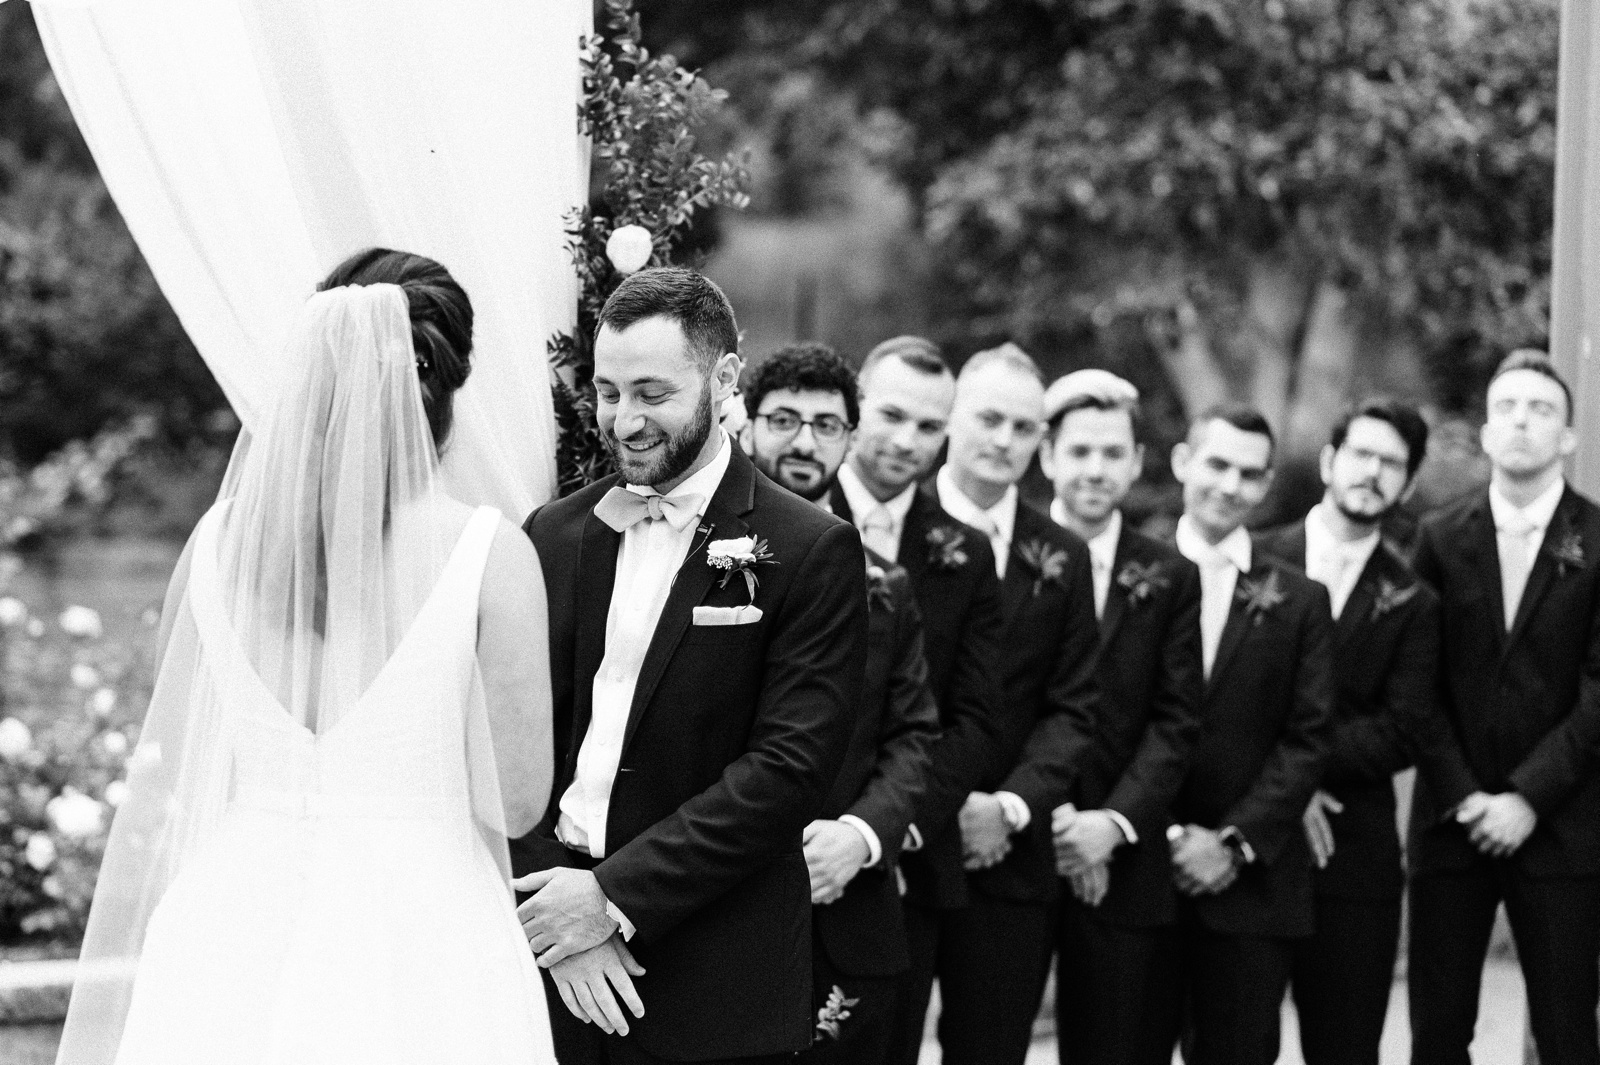 Groom smiling at bride during vows.